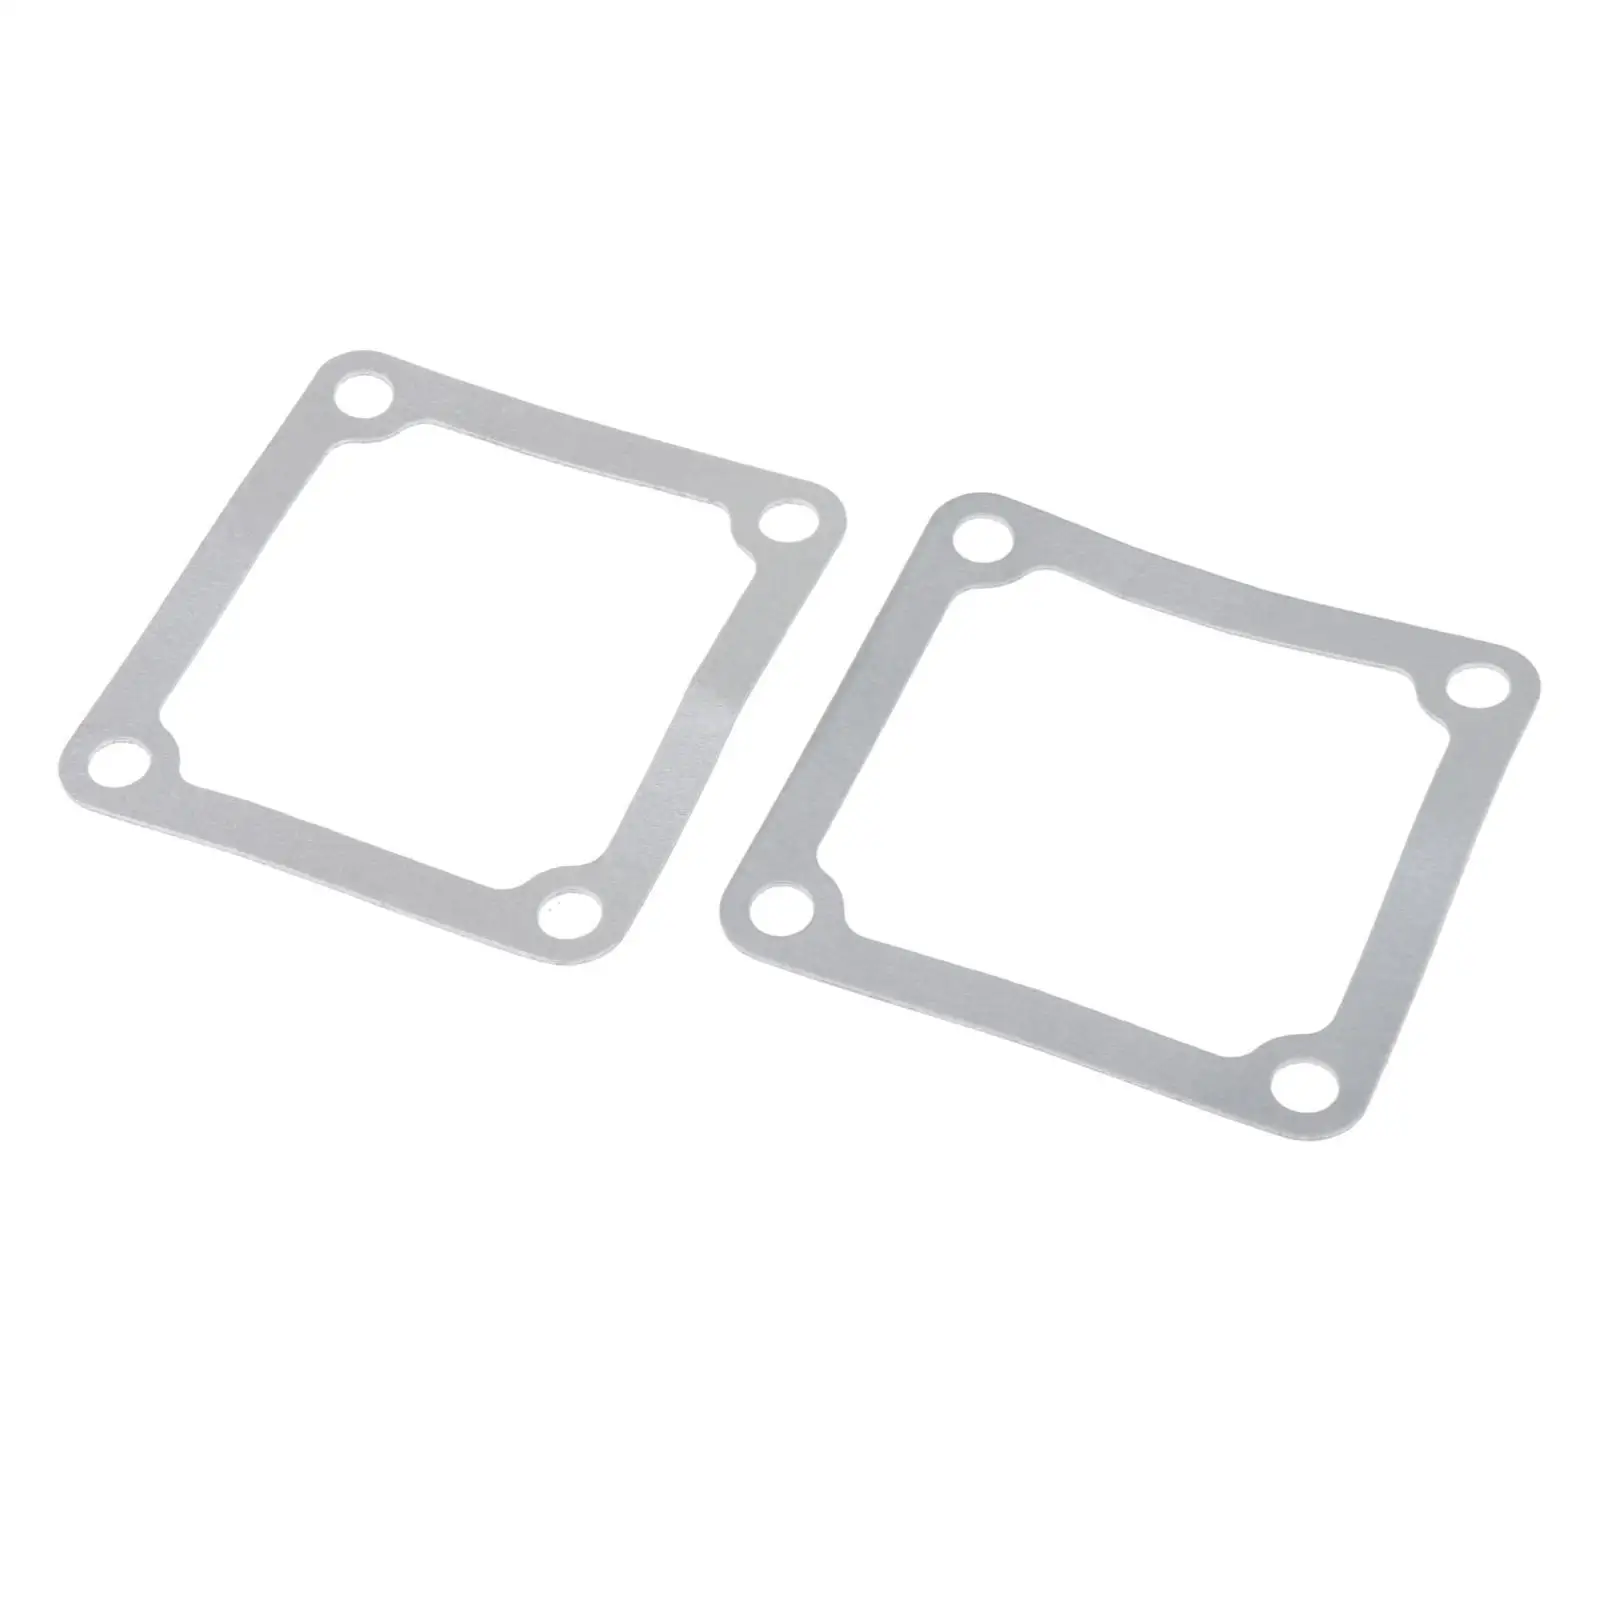 2x Intake Heater Grid Gaskets Professional for 5.9L 93x98mm Automobile Easy to